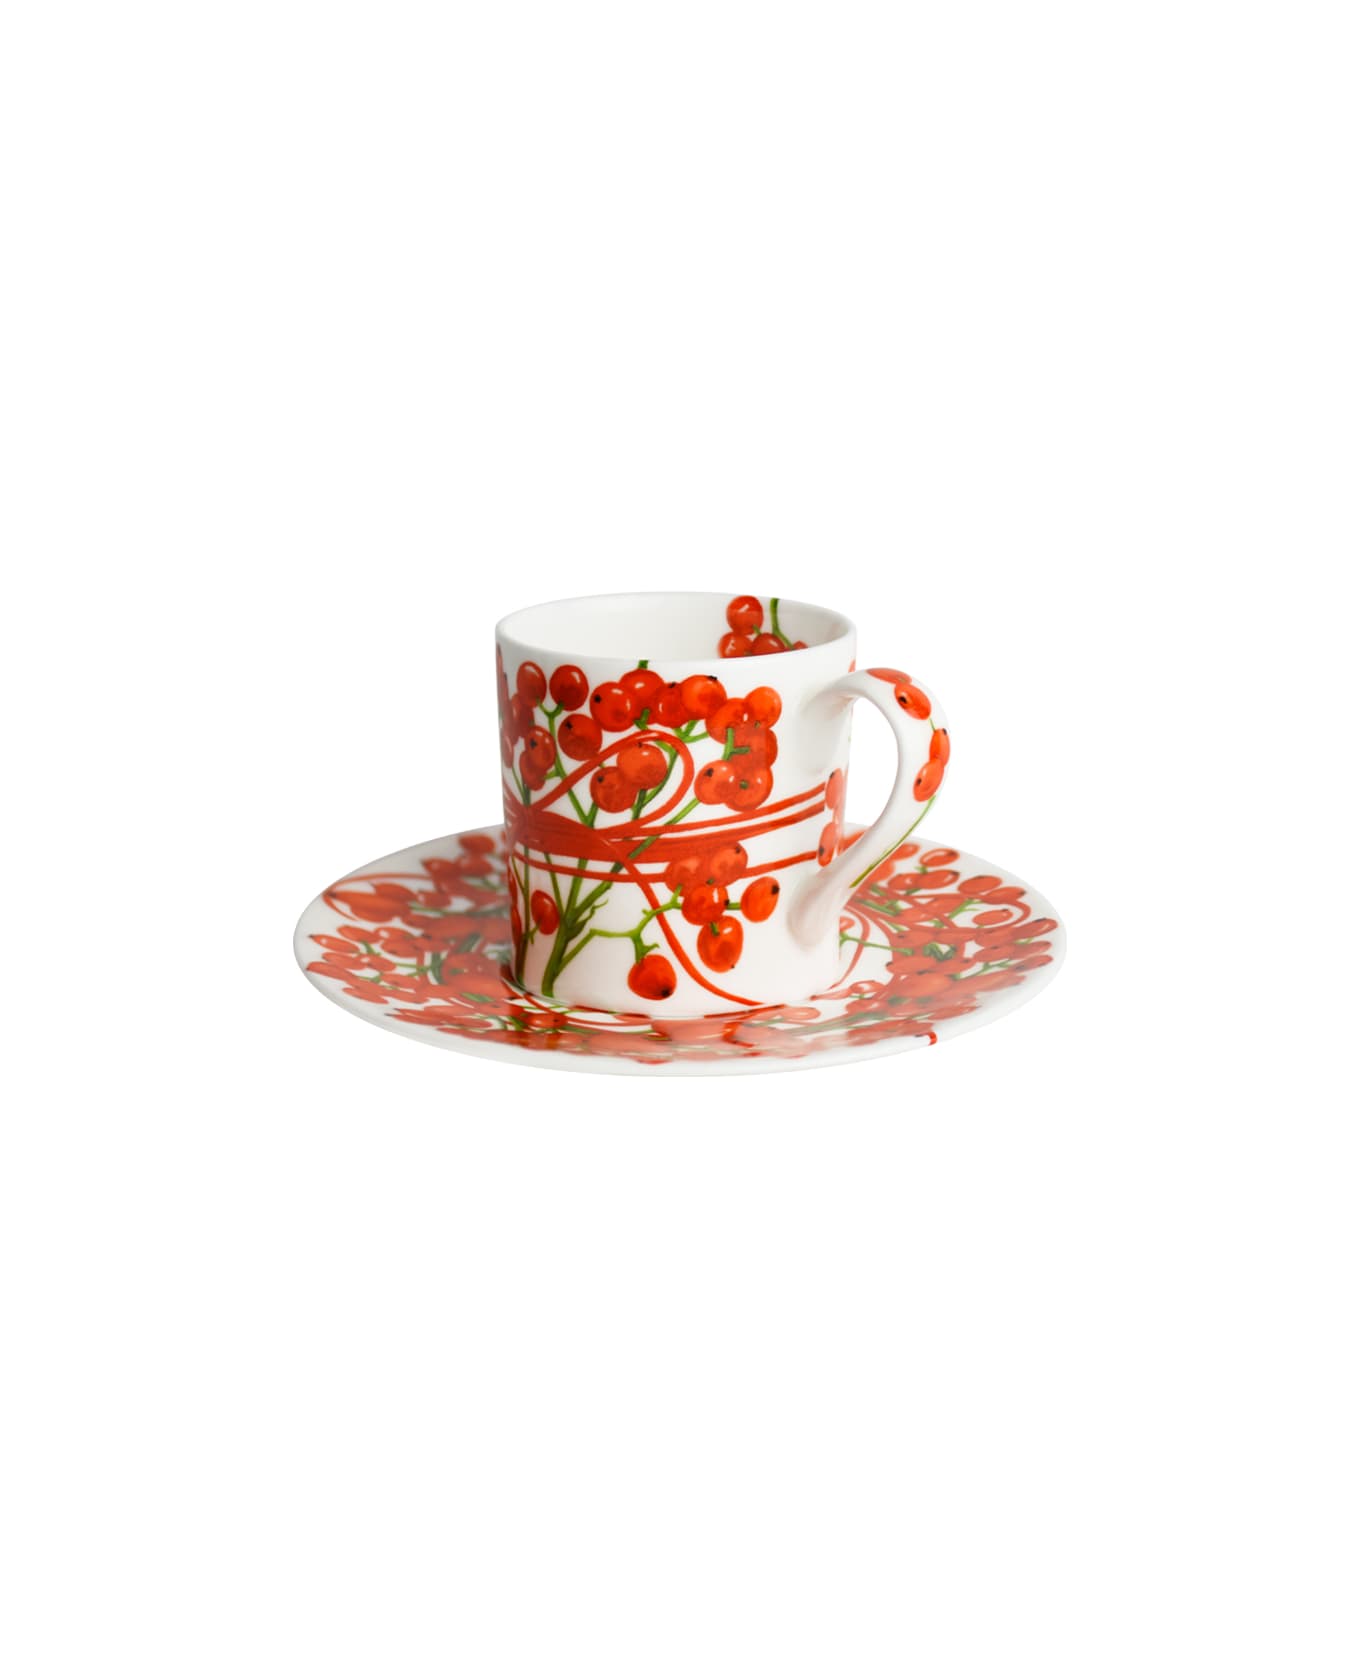 Taitù Set of 2 Espresso Cups & Saucers - Fil Rouge Bacche Collection - Red